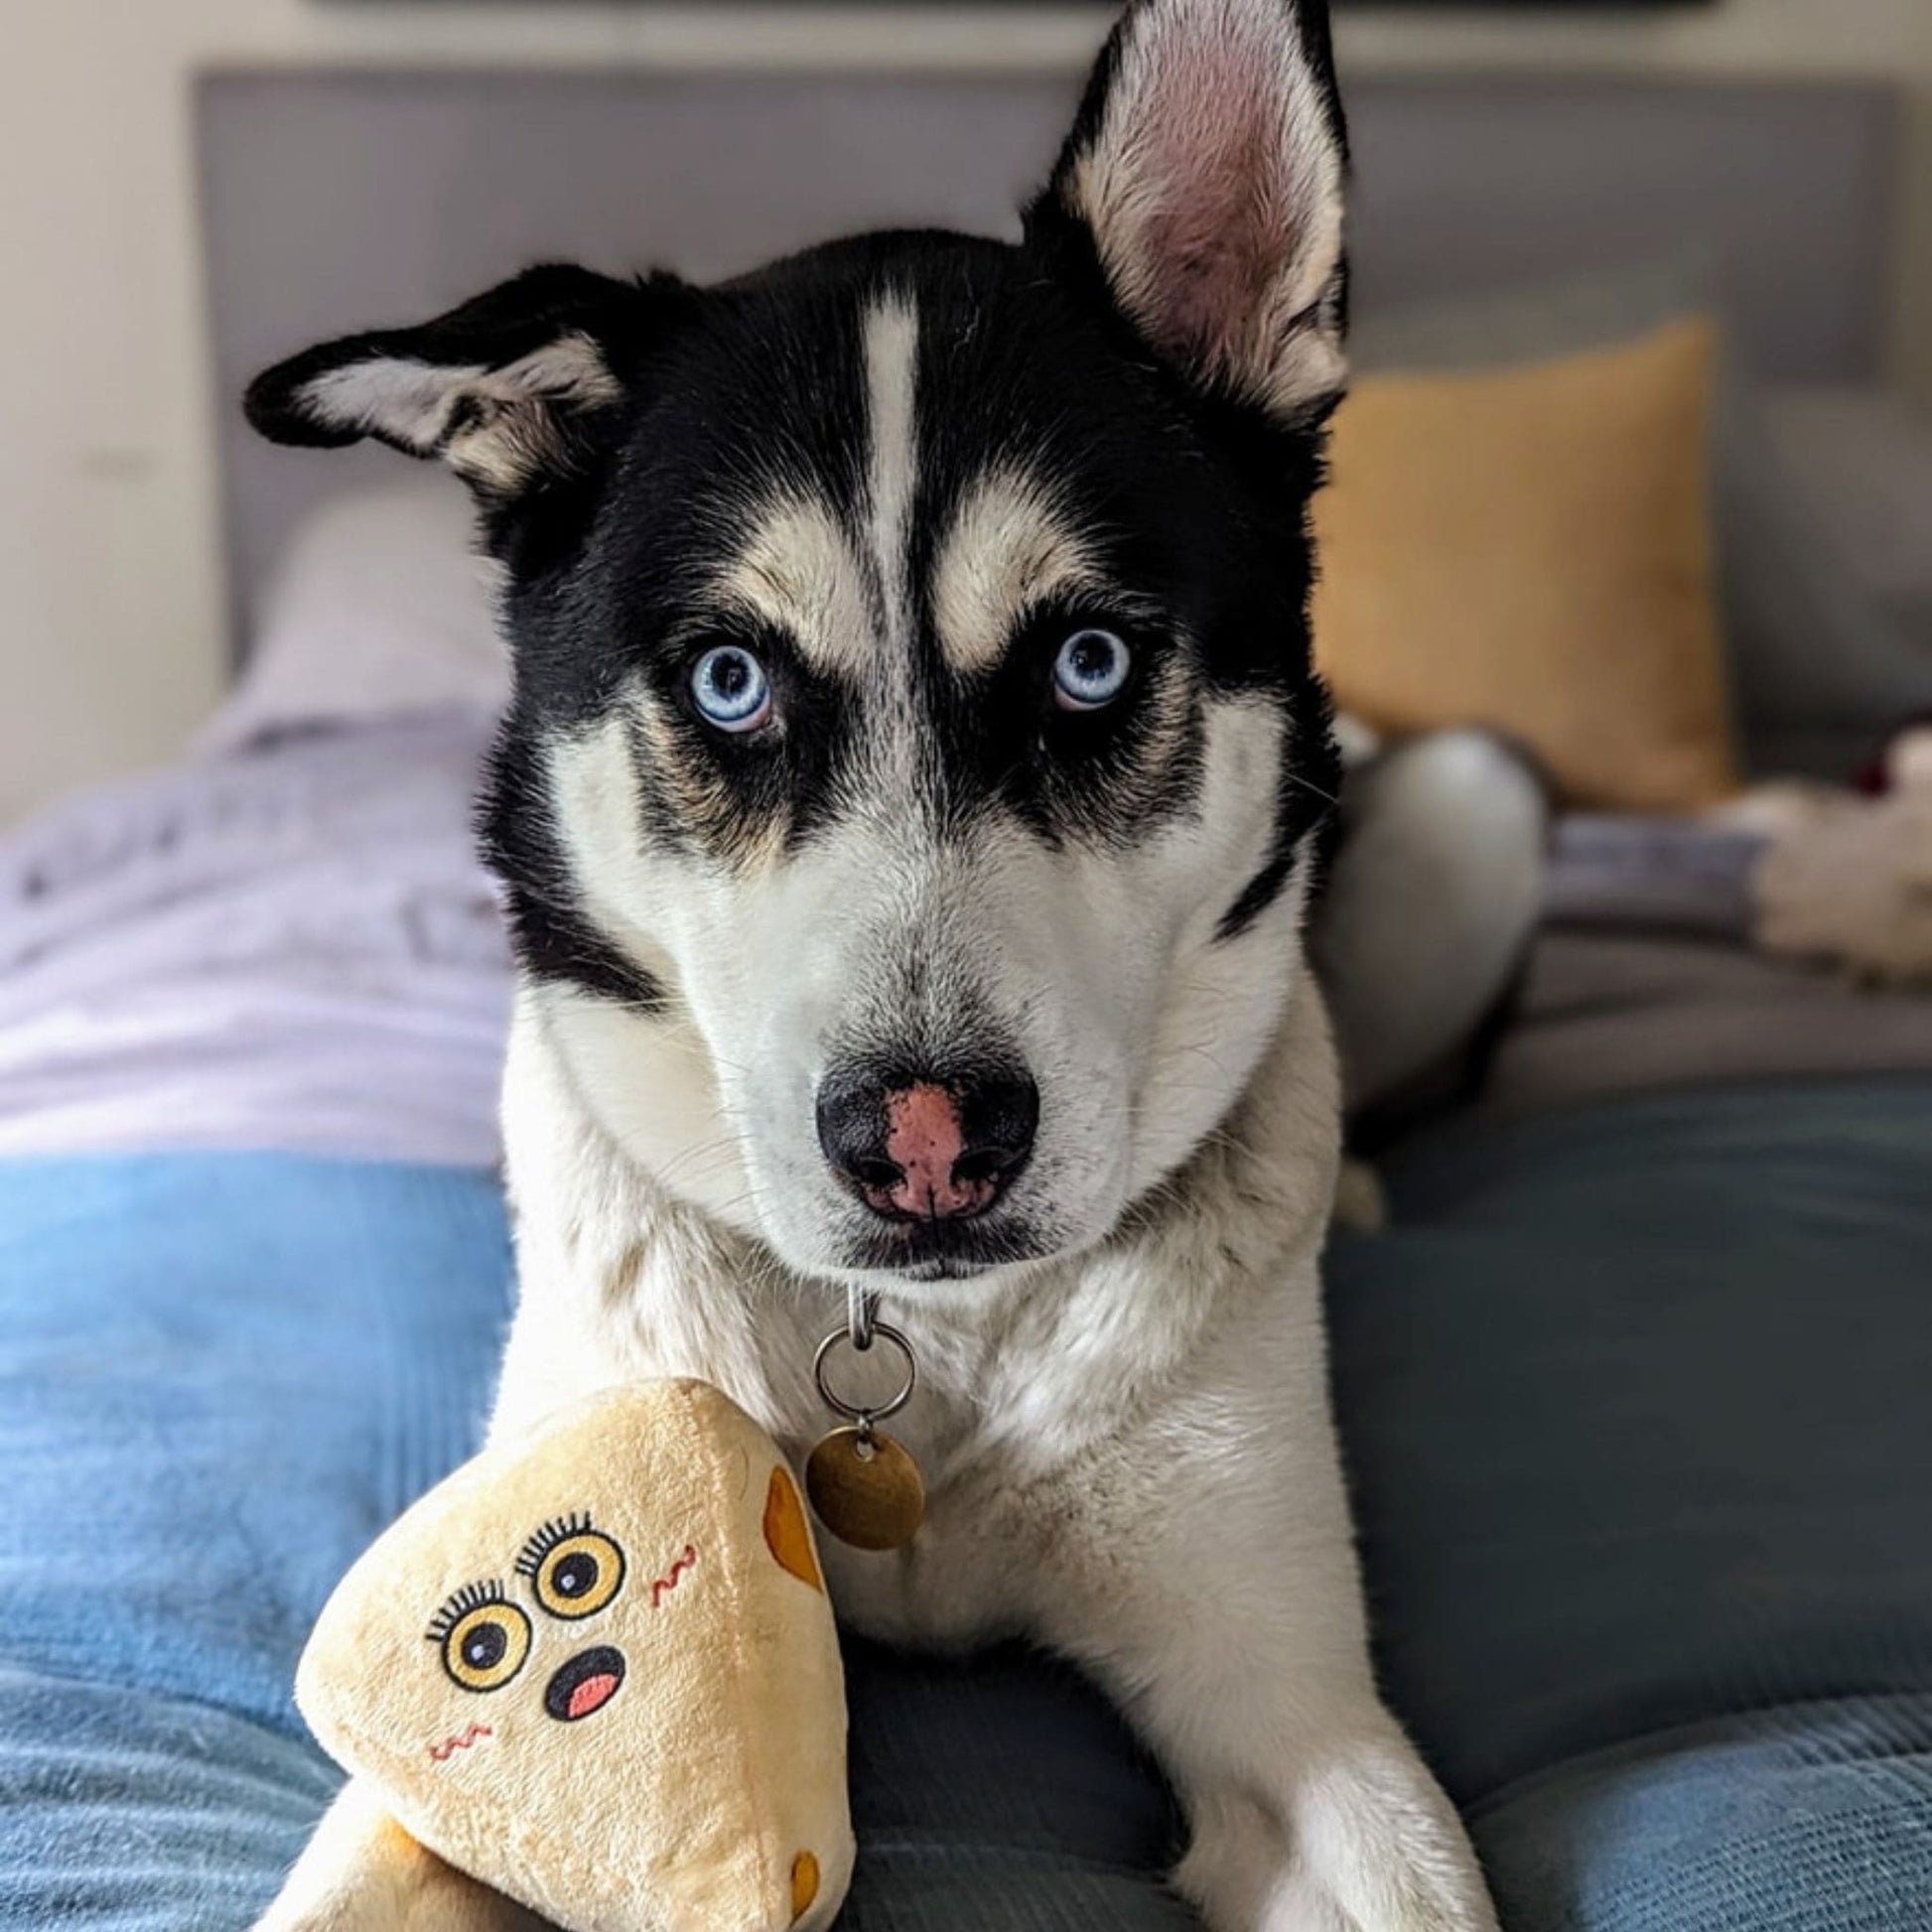 blue eyed husky laying on bed with a plush toy that resembles a piece of cheese.